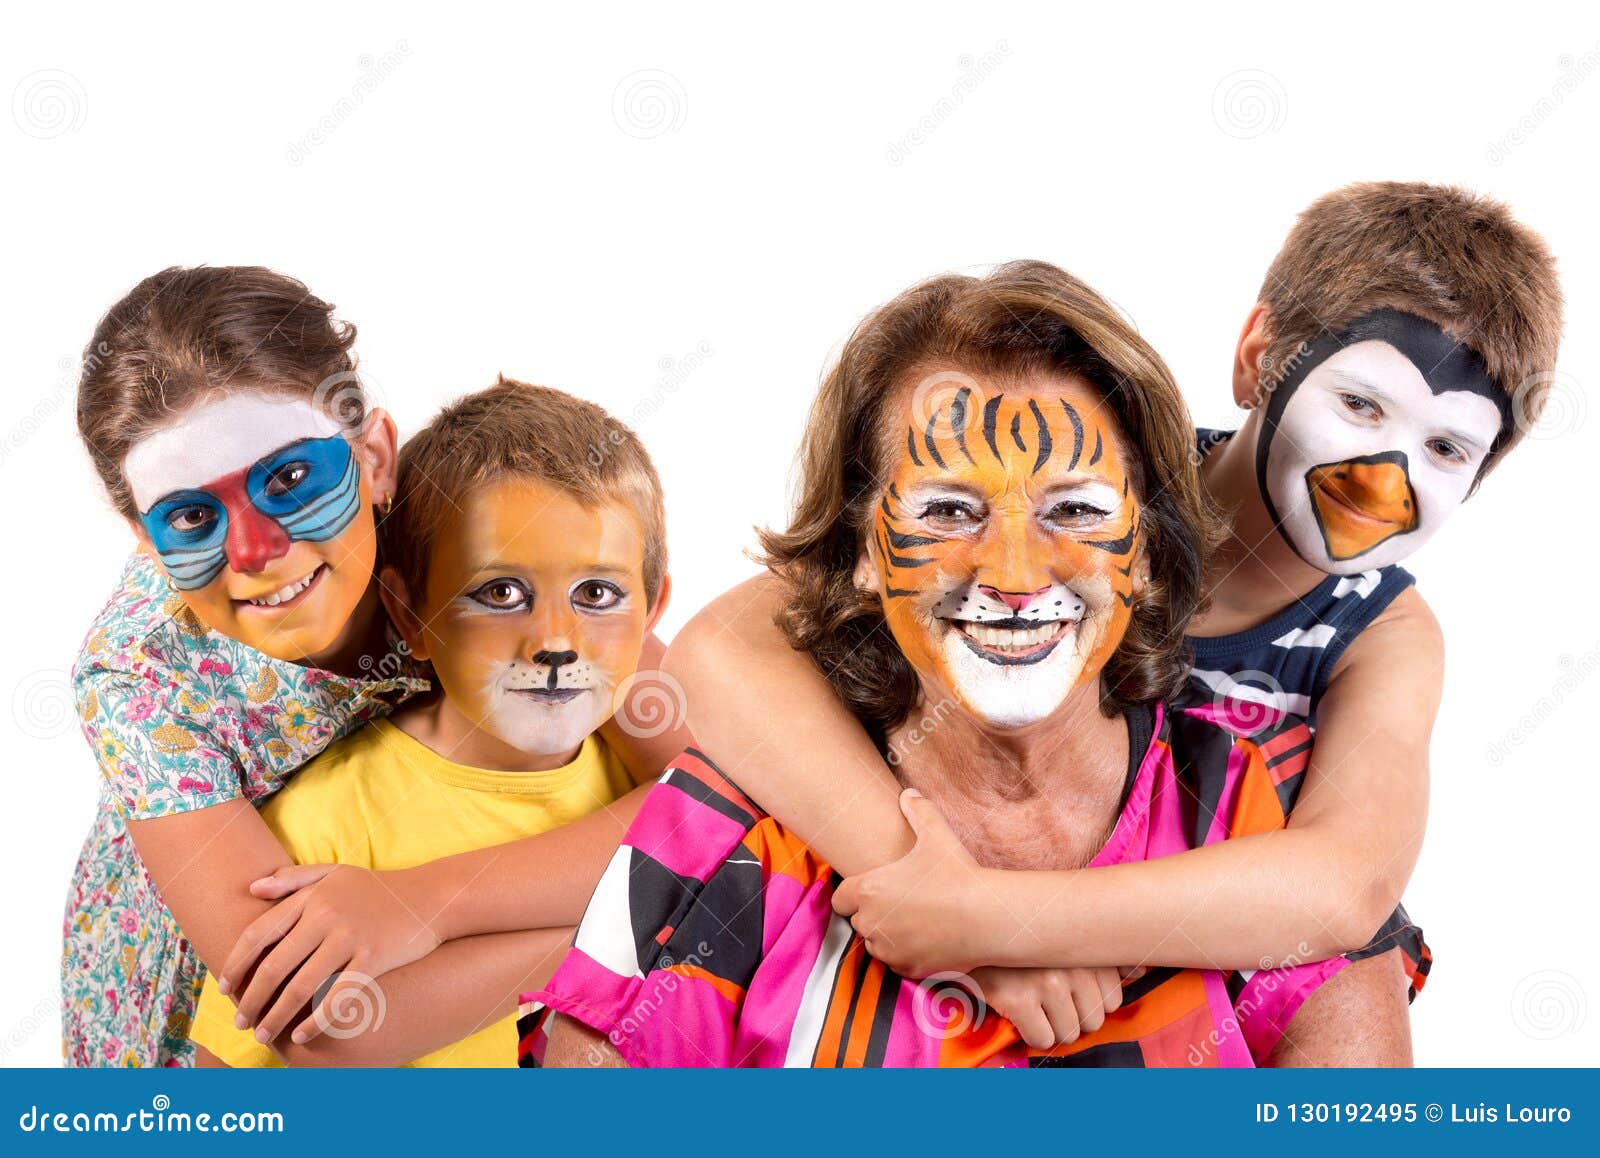 Kids and Granny with Animal Face-paint Stock Image - Image of painting ...